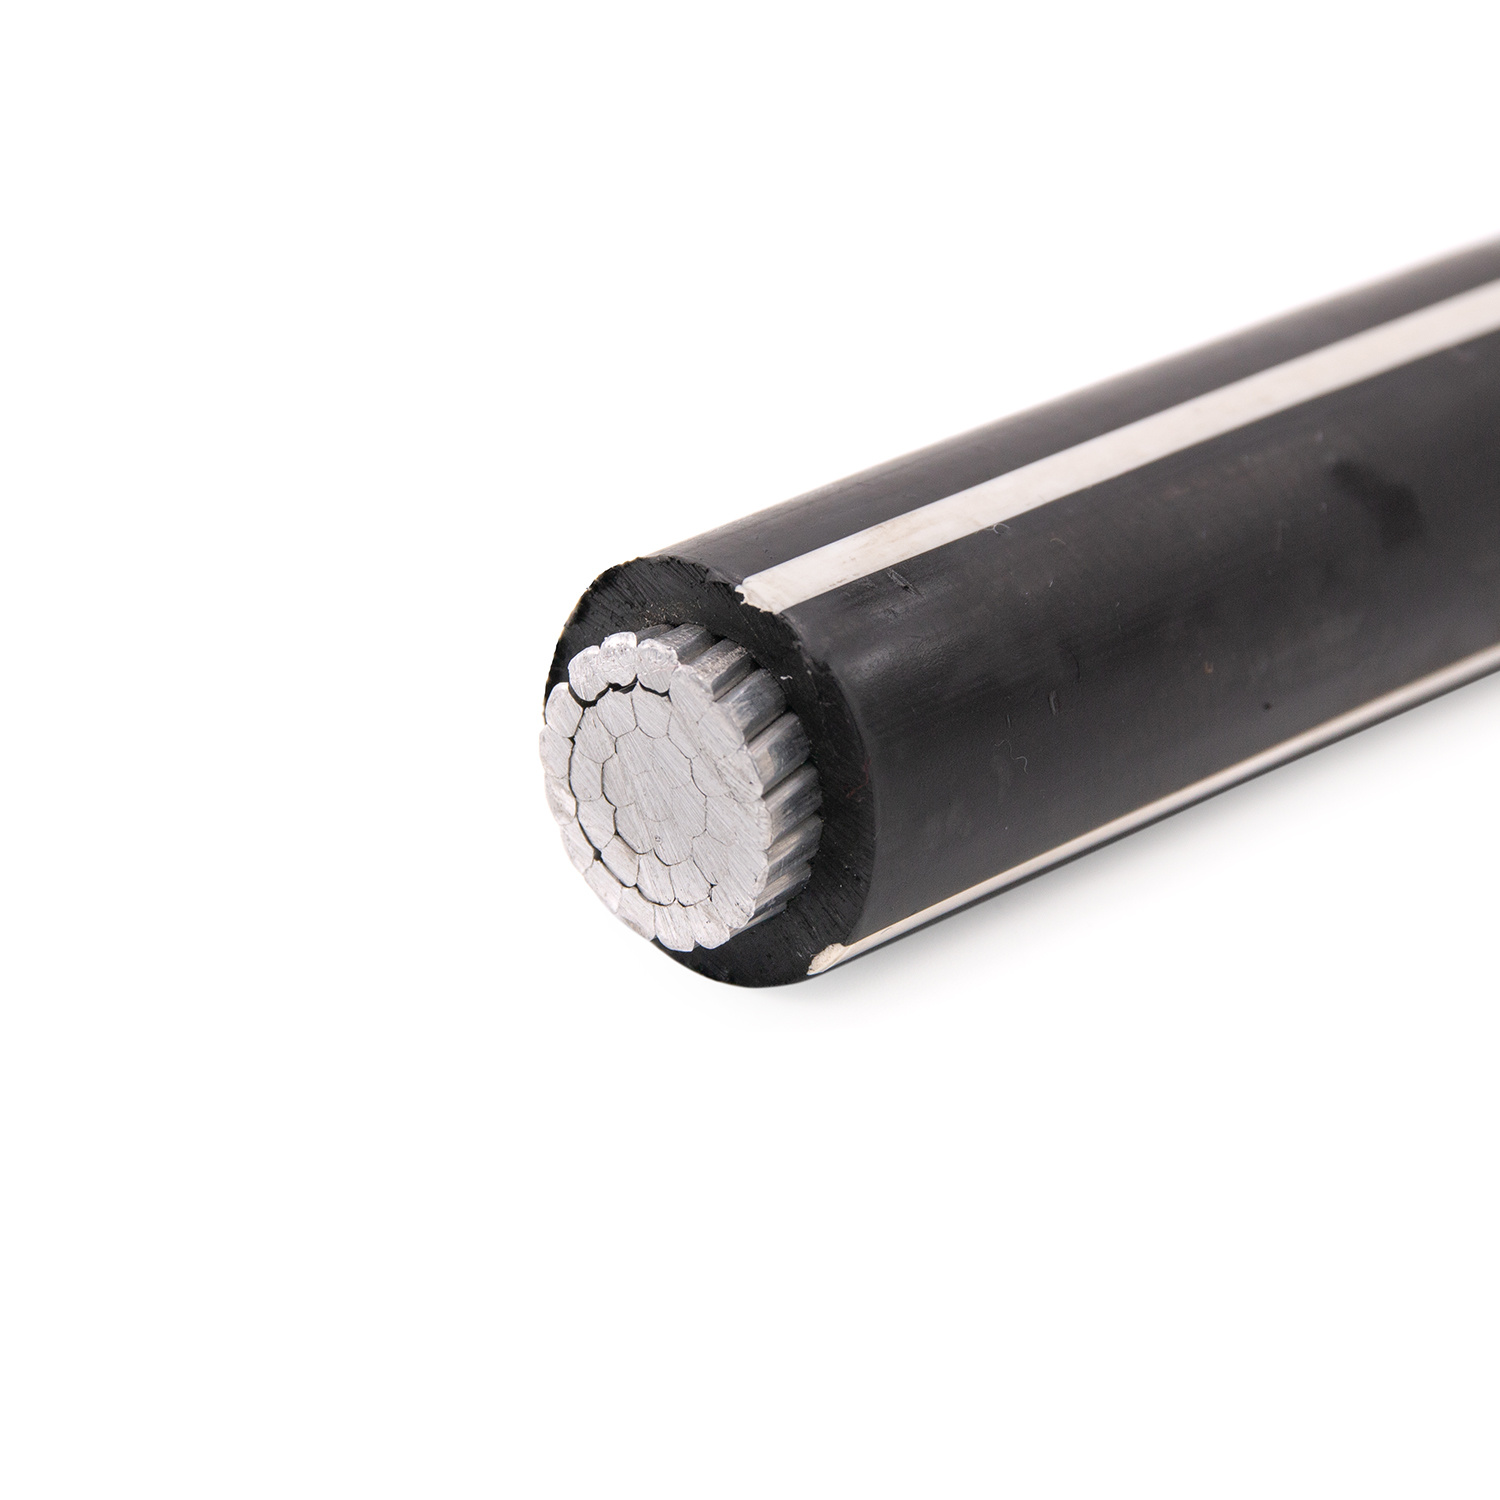 Cable Price of 250mcm PV Cable UL Approval 250mcm AA-8000 Aluminum Alloy Photovoltaic Wire PV Cable